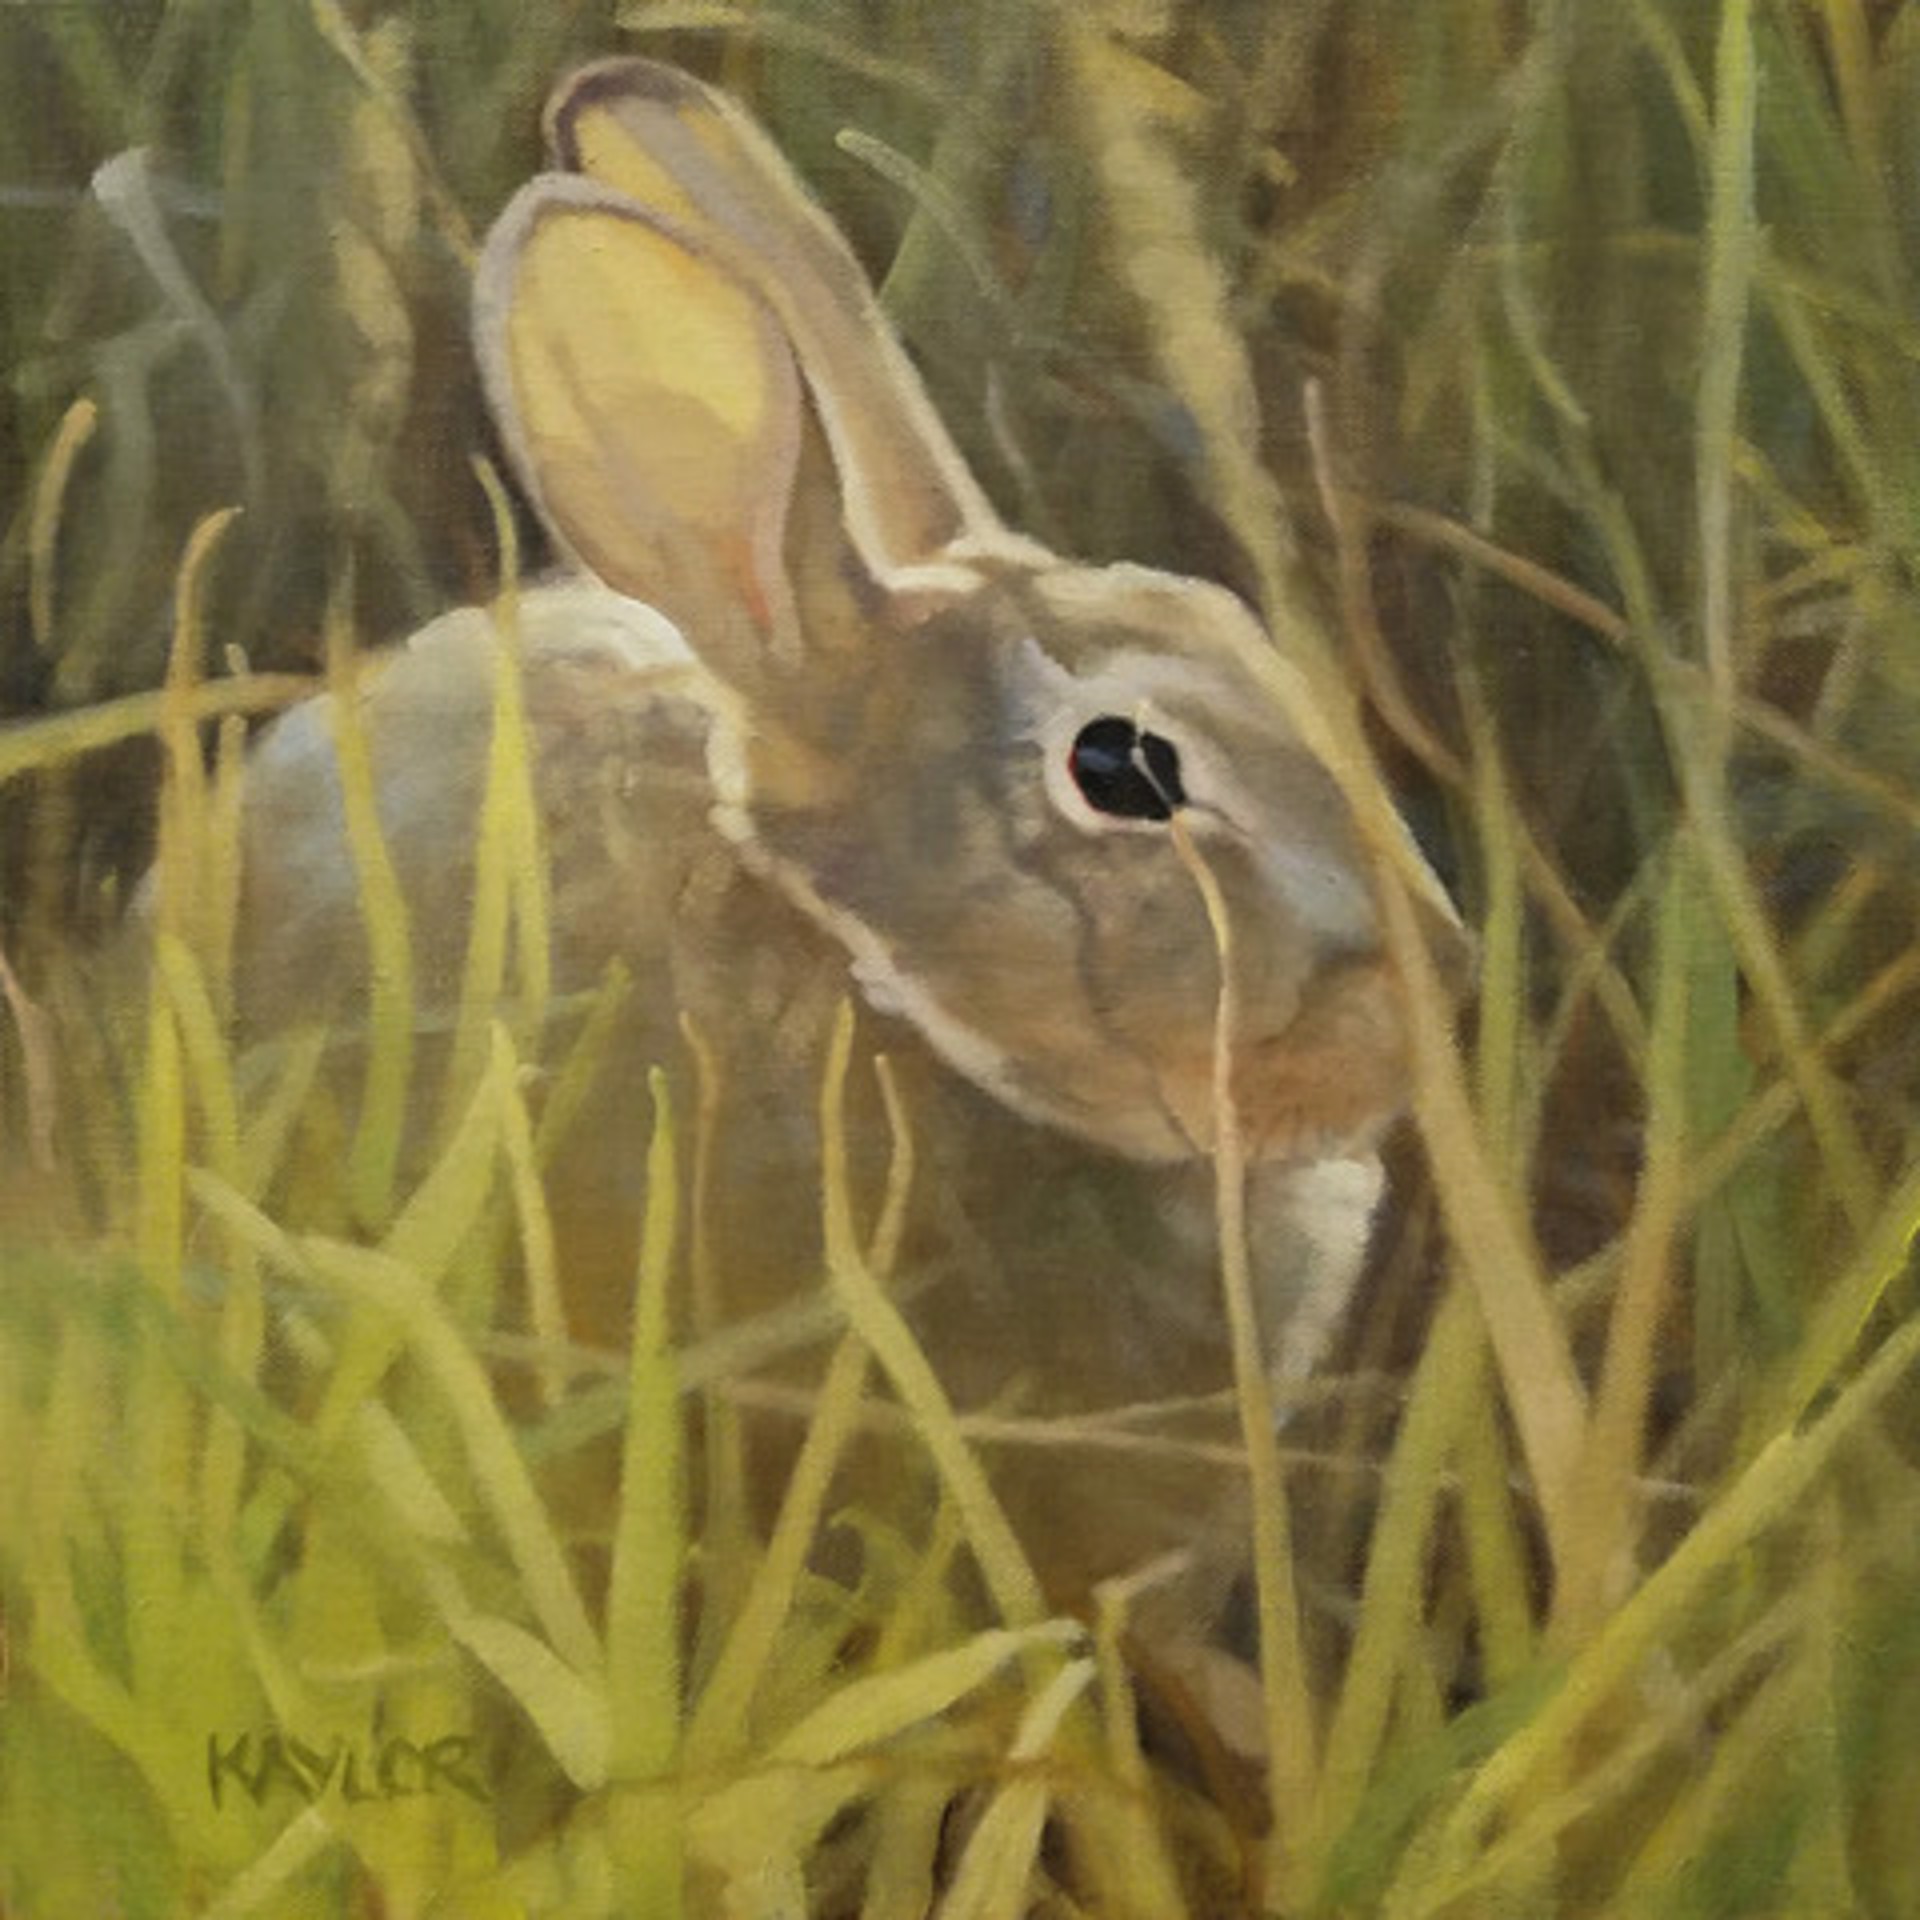 In Tall Grass by Deb Kaylor